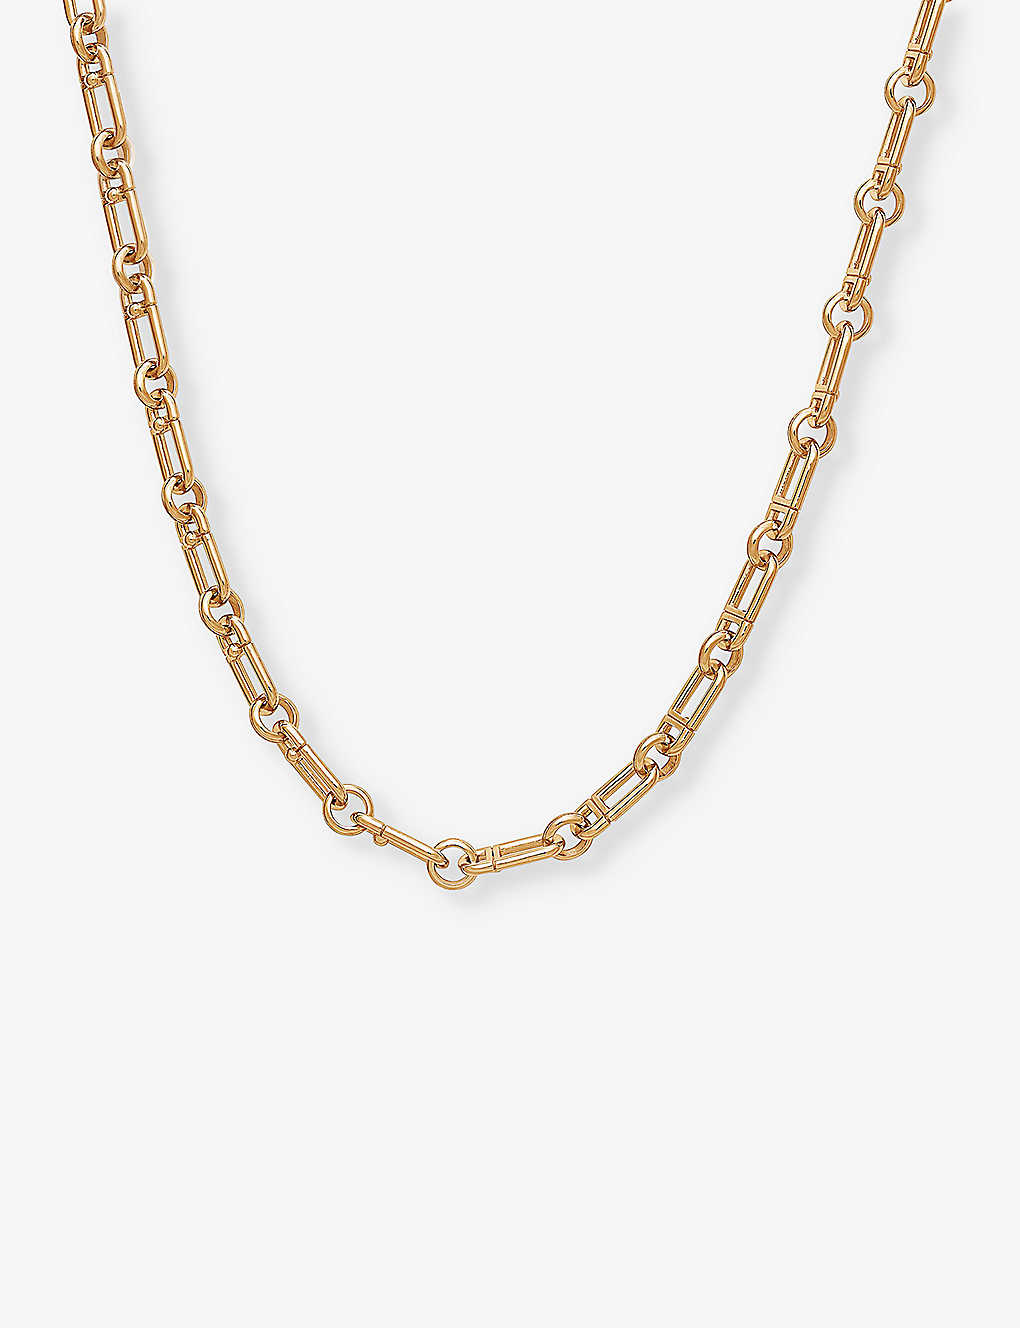 Rachel Jackson Stellar 22ct Yellow Gold-plated Sterling-silver Chain Necklace